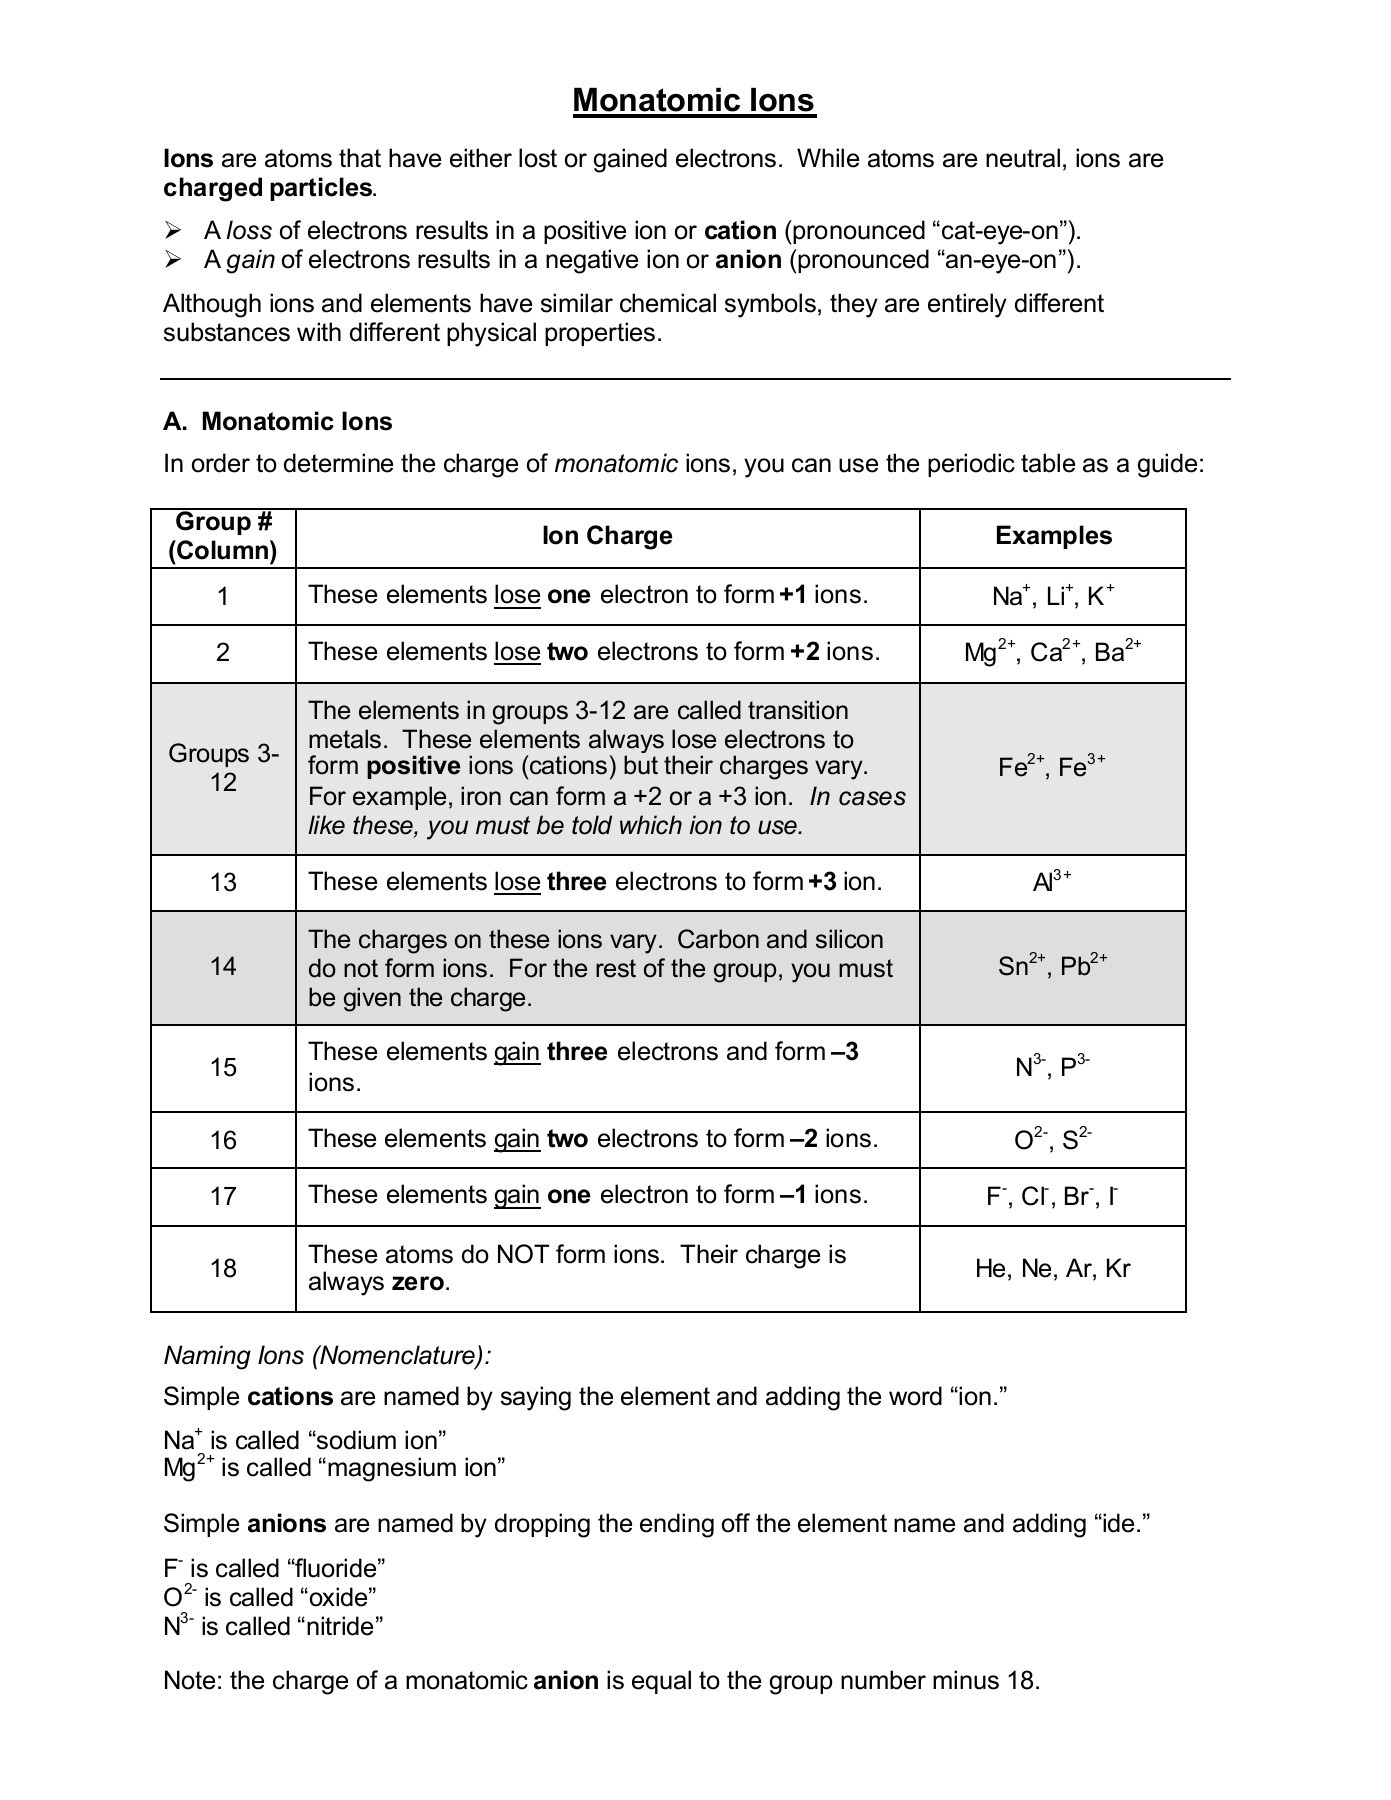 Atoms and Ions Worksheet Monatomic Ions Academic Puter Center Pages 1 12